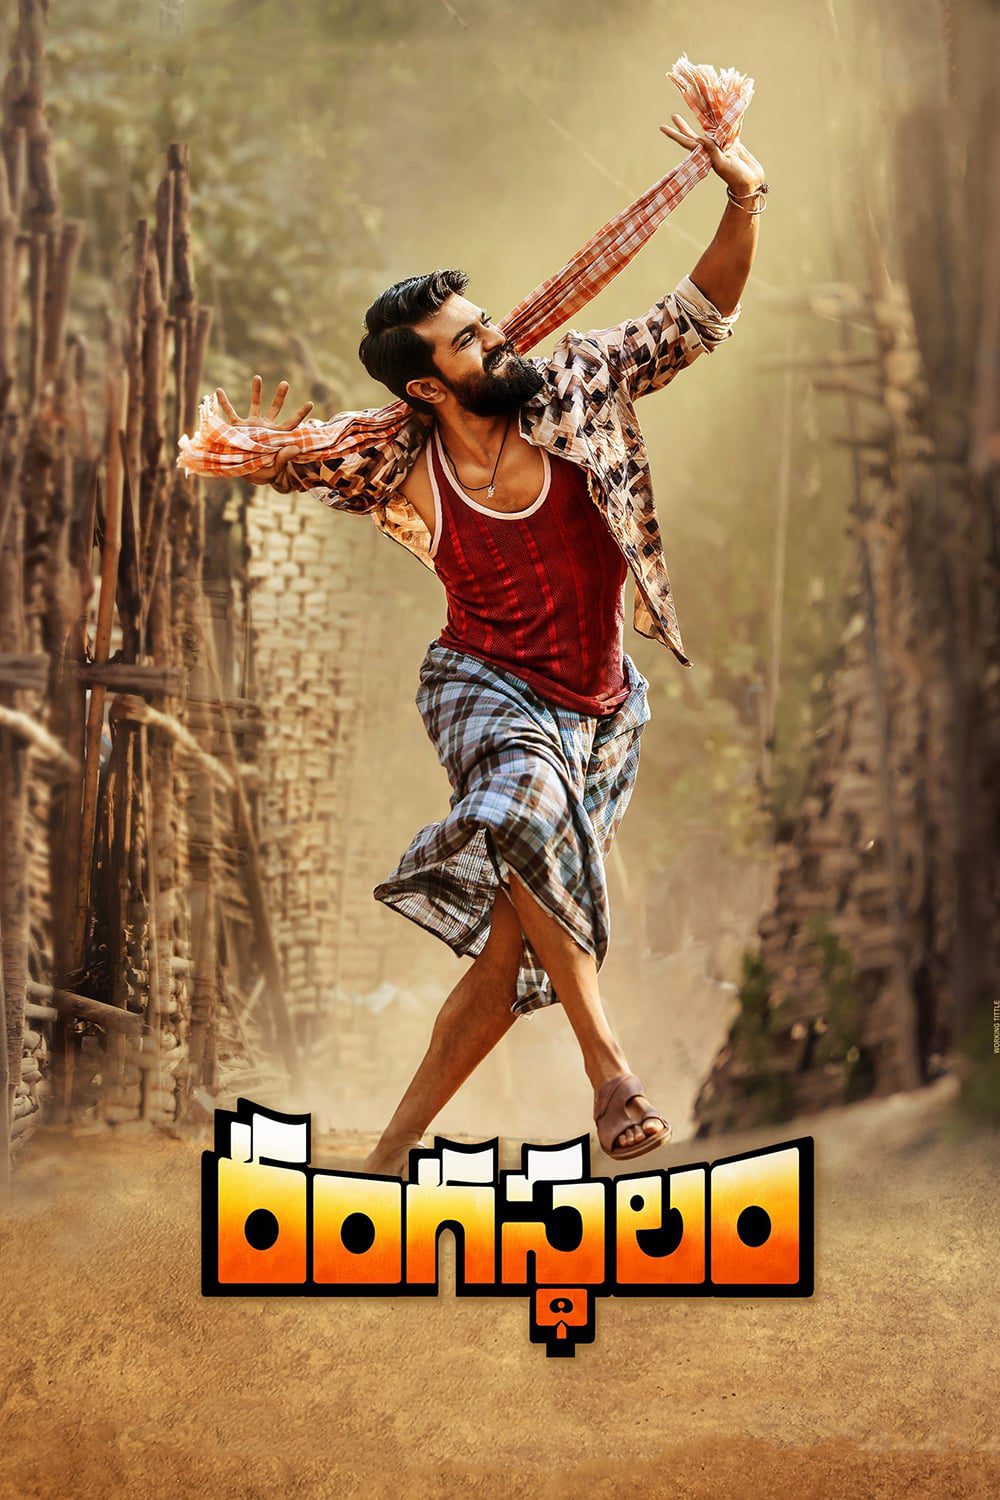 Poster for the movie "Rangasthalam"